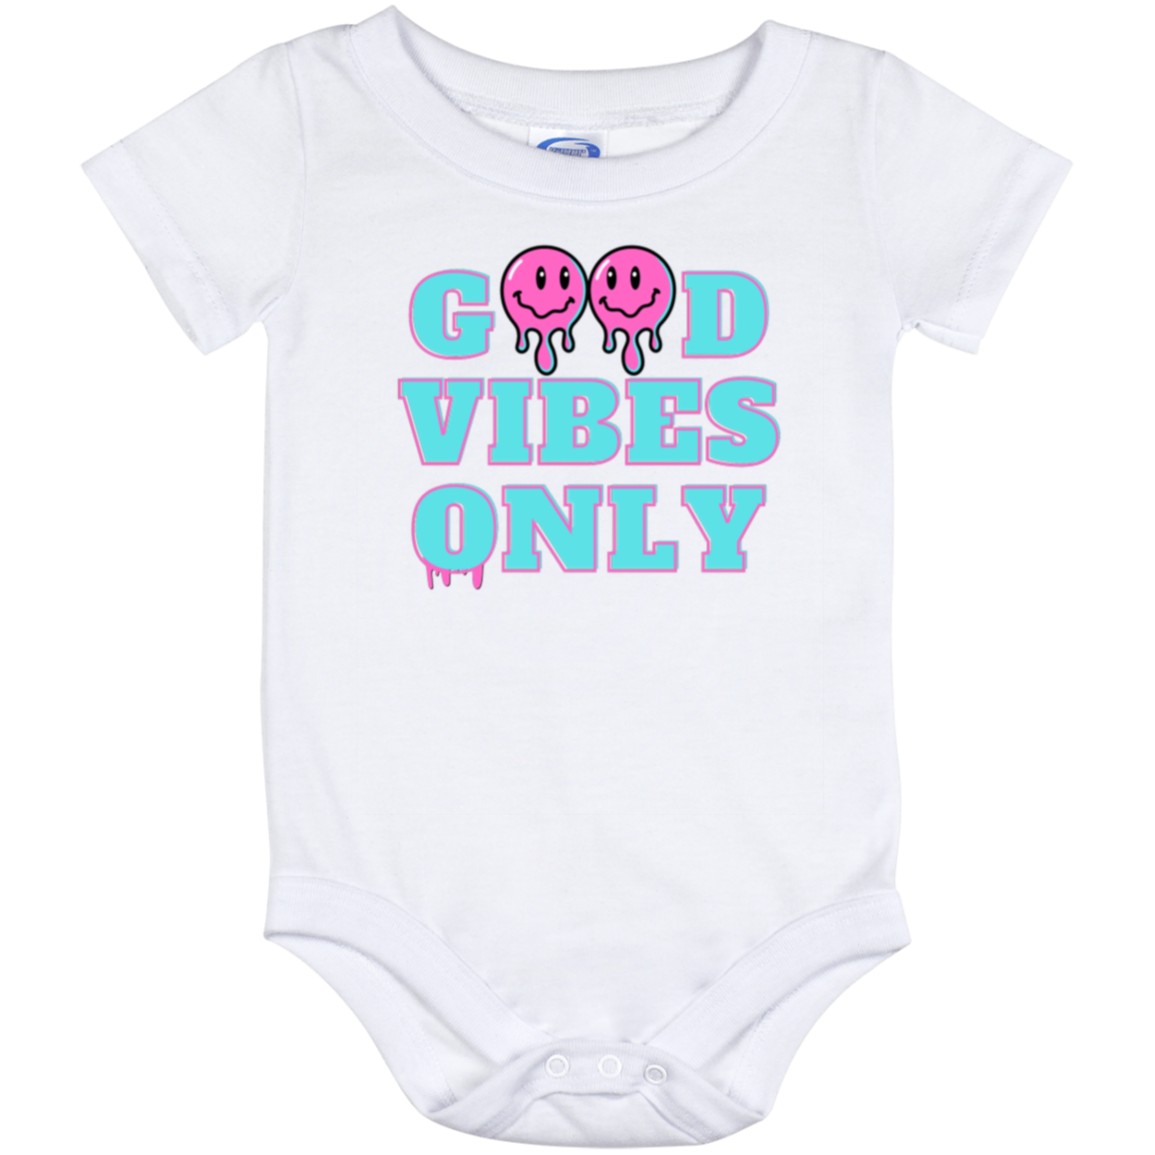 Good Vibes Only - Unisex Baby Onesie's 6, 12, & 24 Month